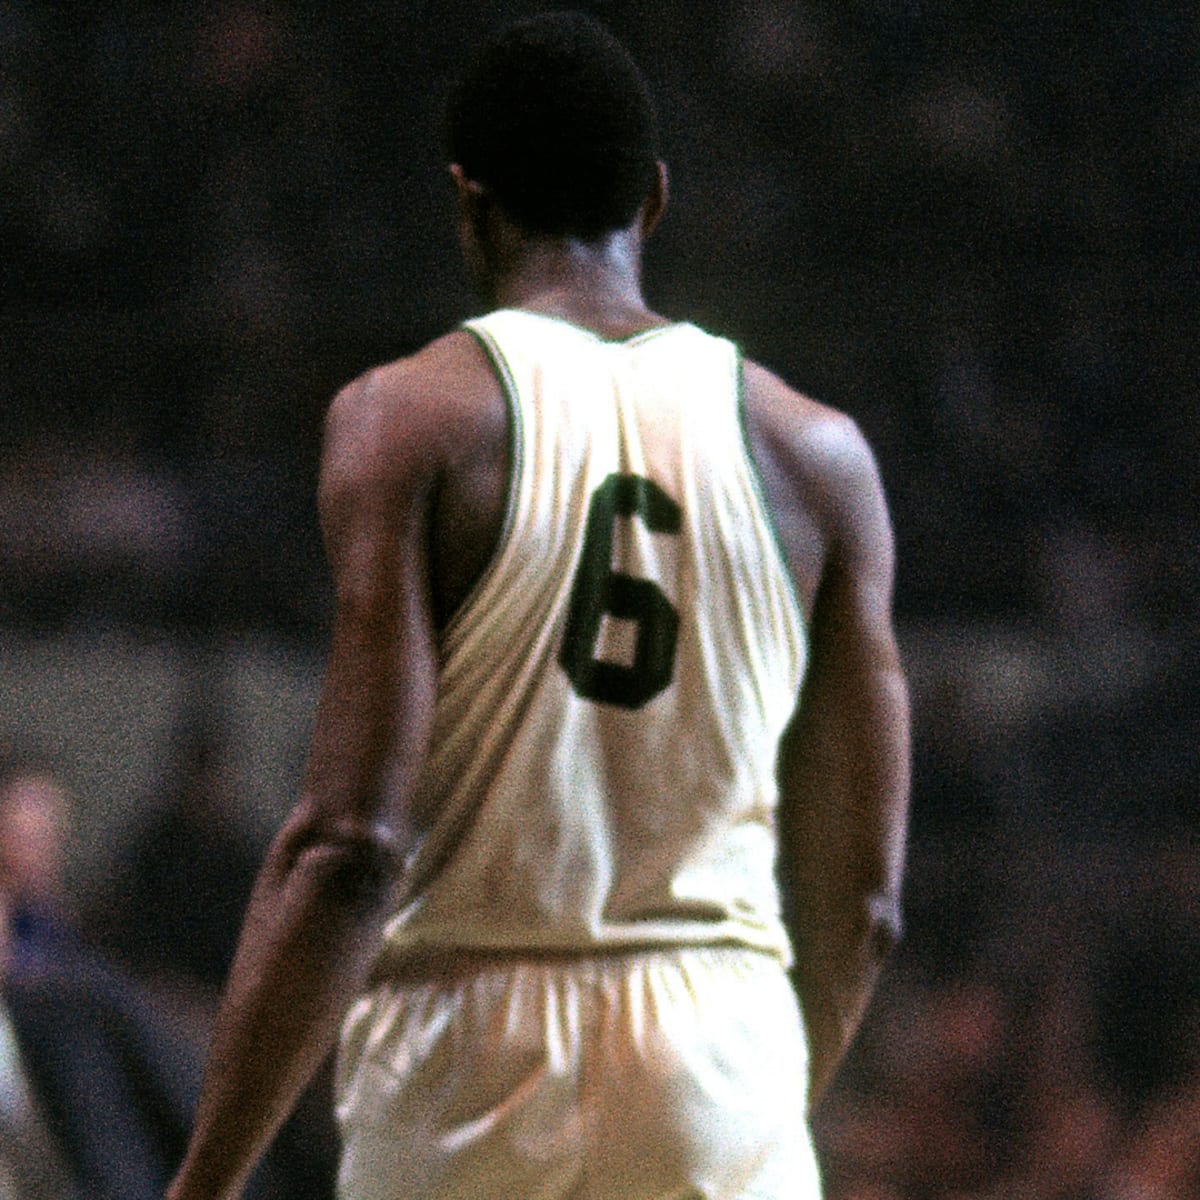 NBA permanently retires Bill Russell's No. 6 jersey